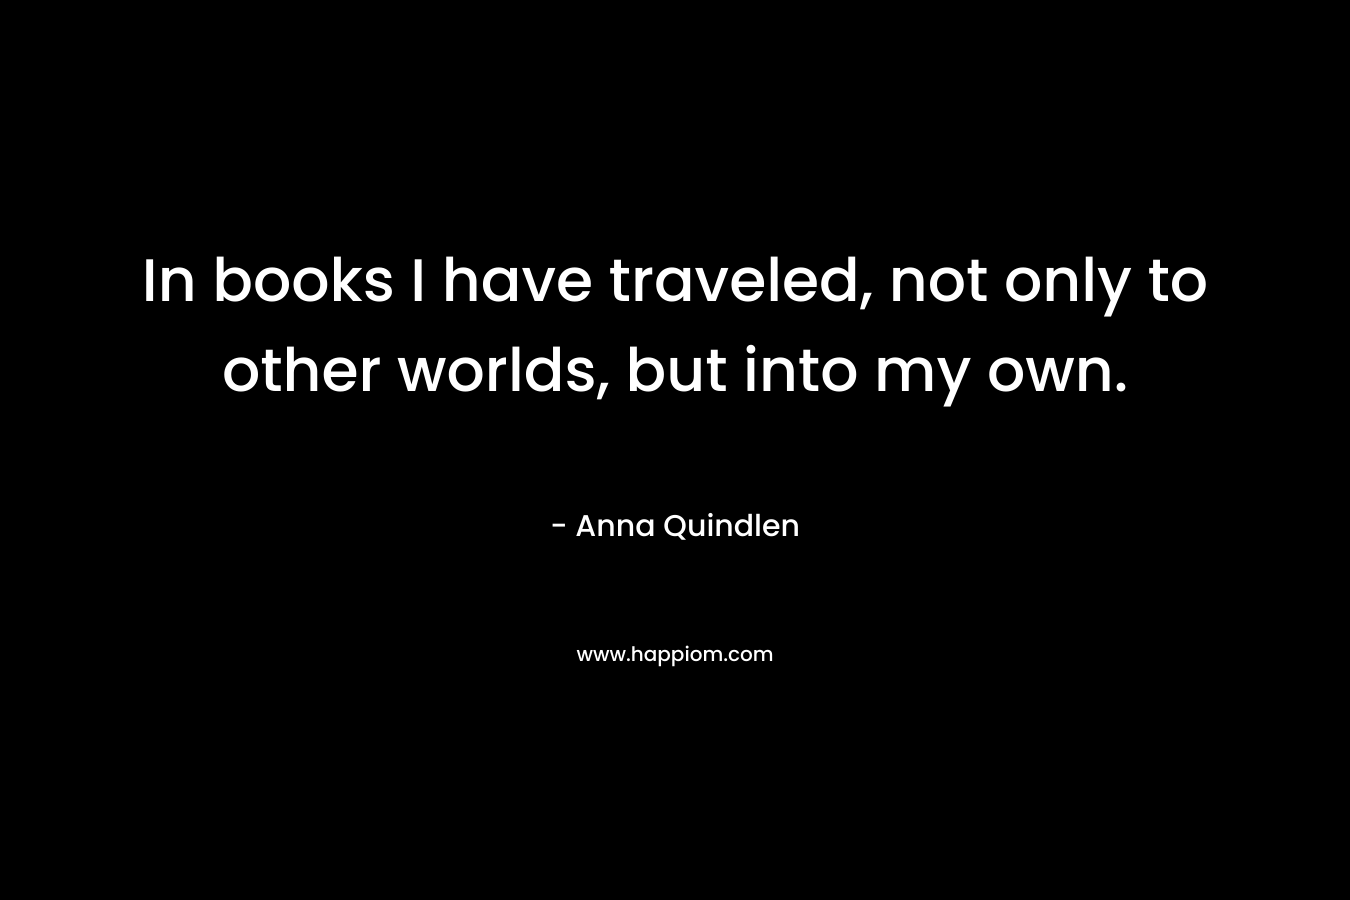 In books I have traveled, not only to other worlds, but into my own. – Anna Quindlen